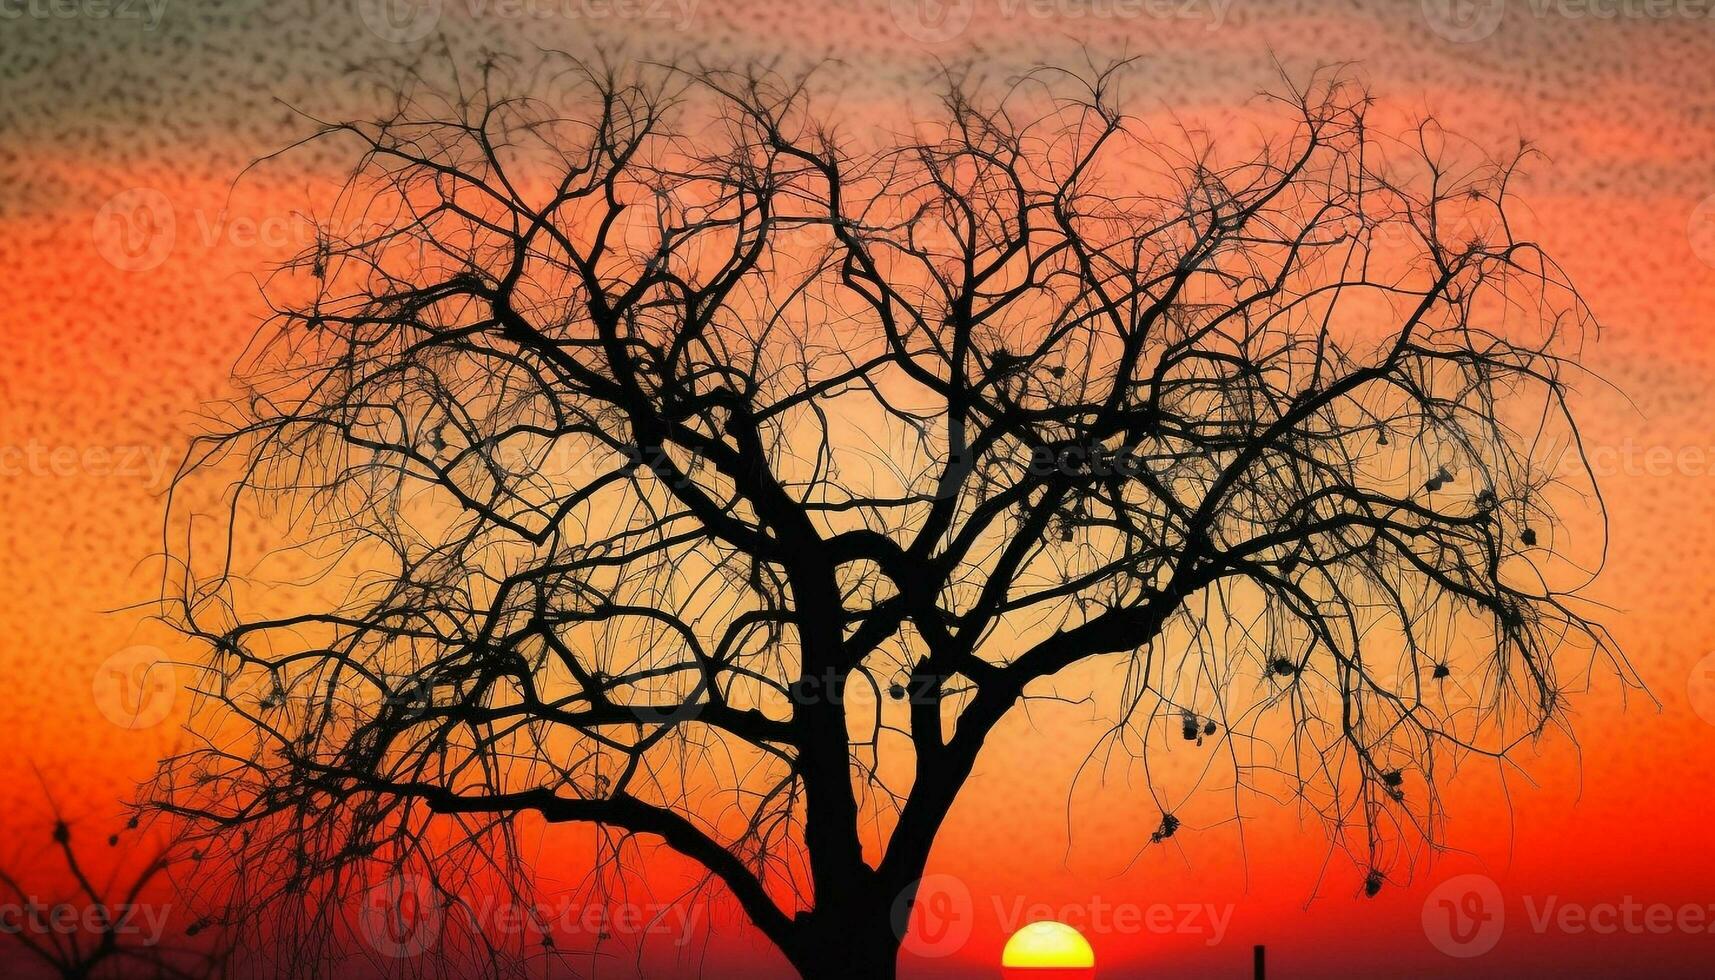 Silhouette of acacia tree back lit by glowing sunset sky generated by AI photo